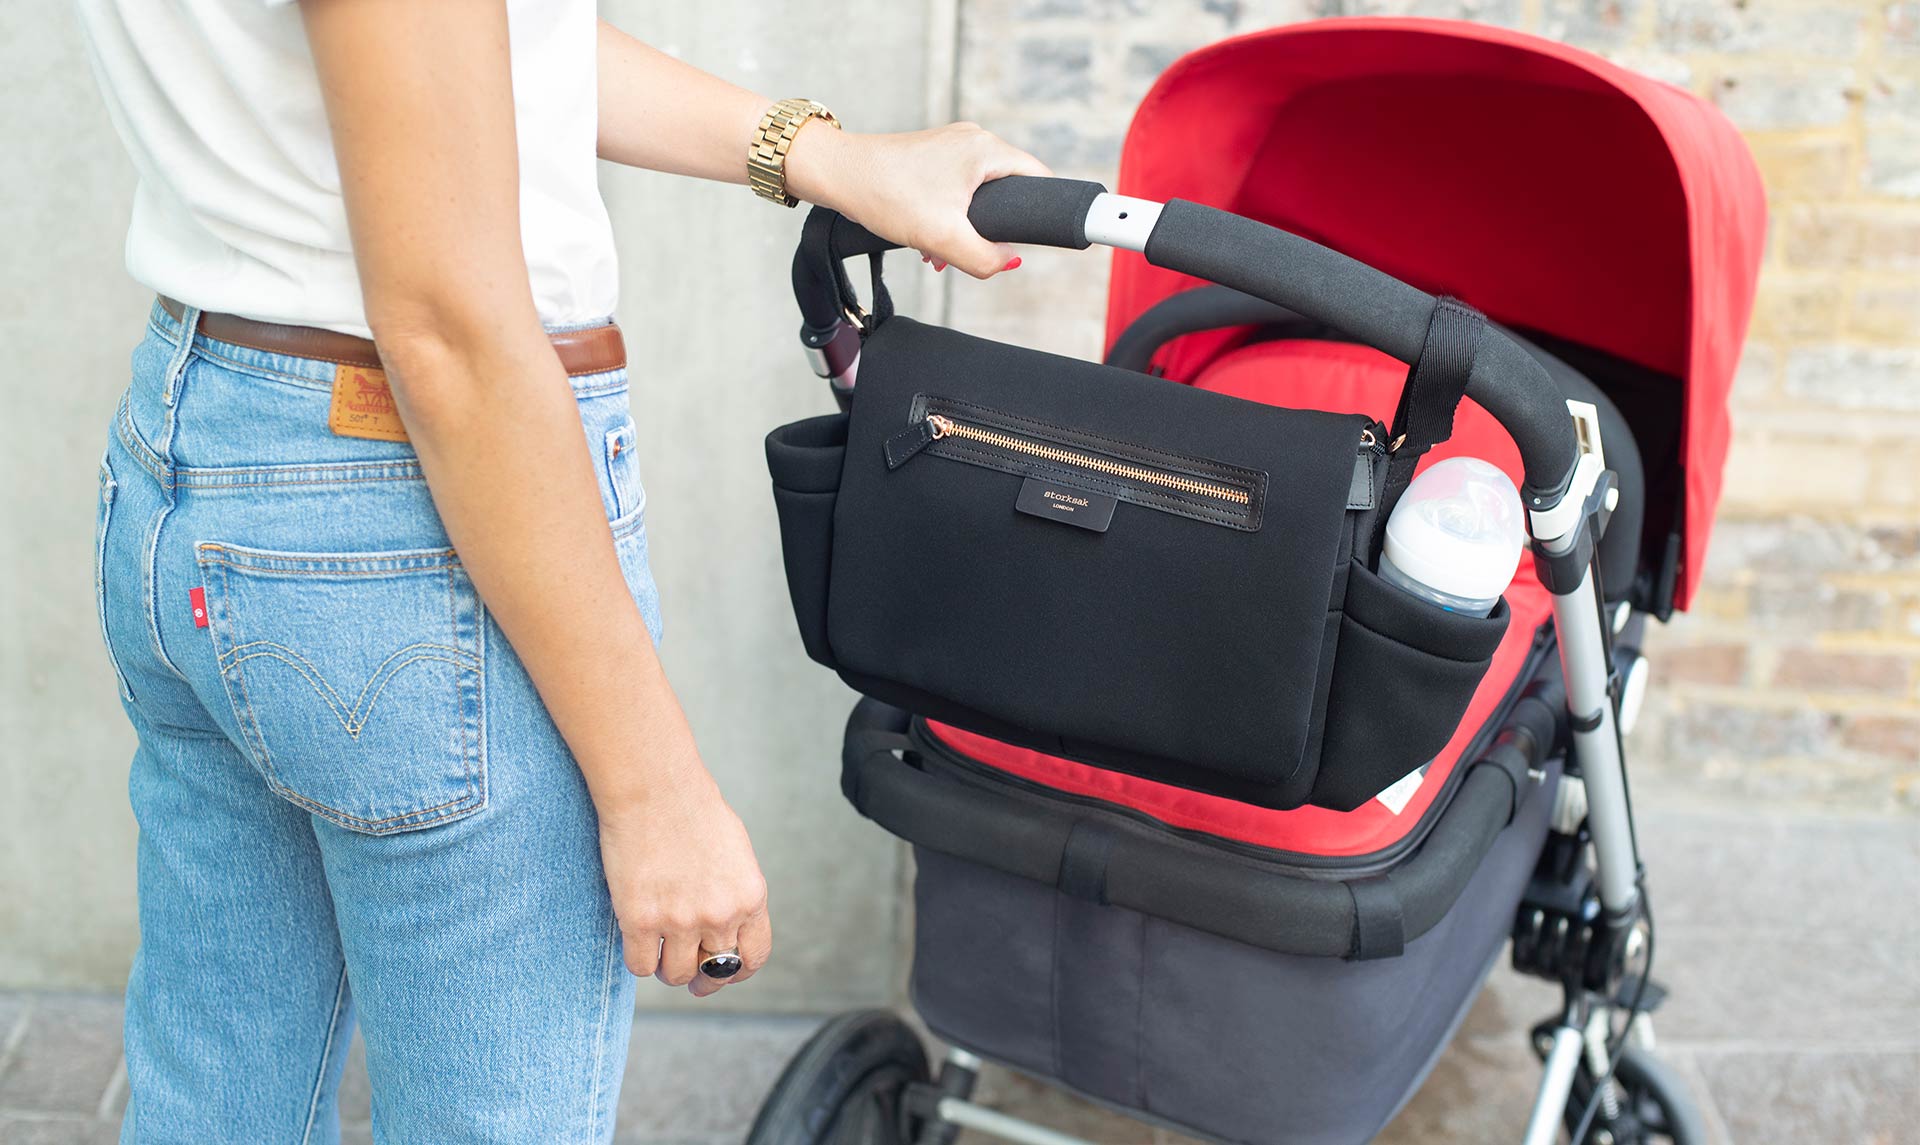 Stroller Organiser Luxe Black Scuba Baby accessories | Storksak Baby accessories | Storksak - Award-winning Baby Changing Bags & Accessories